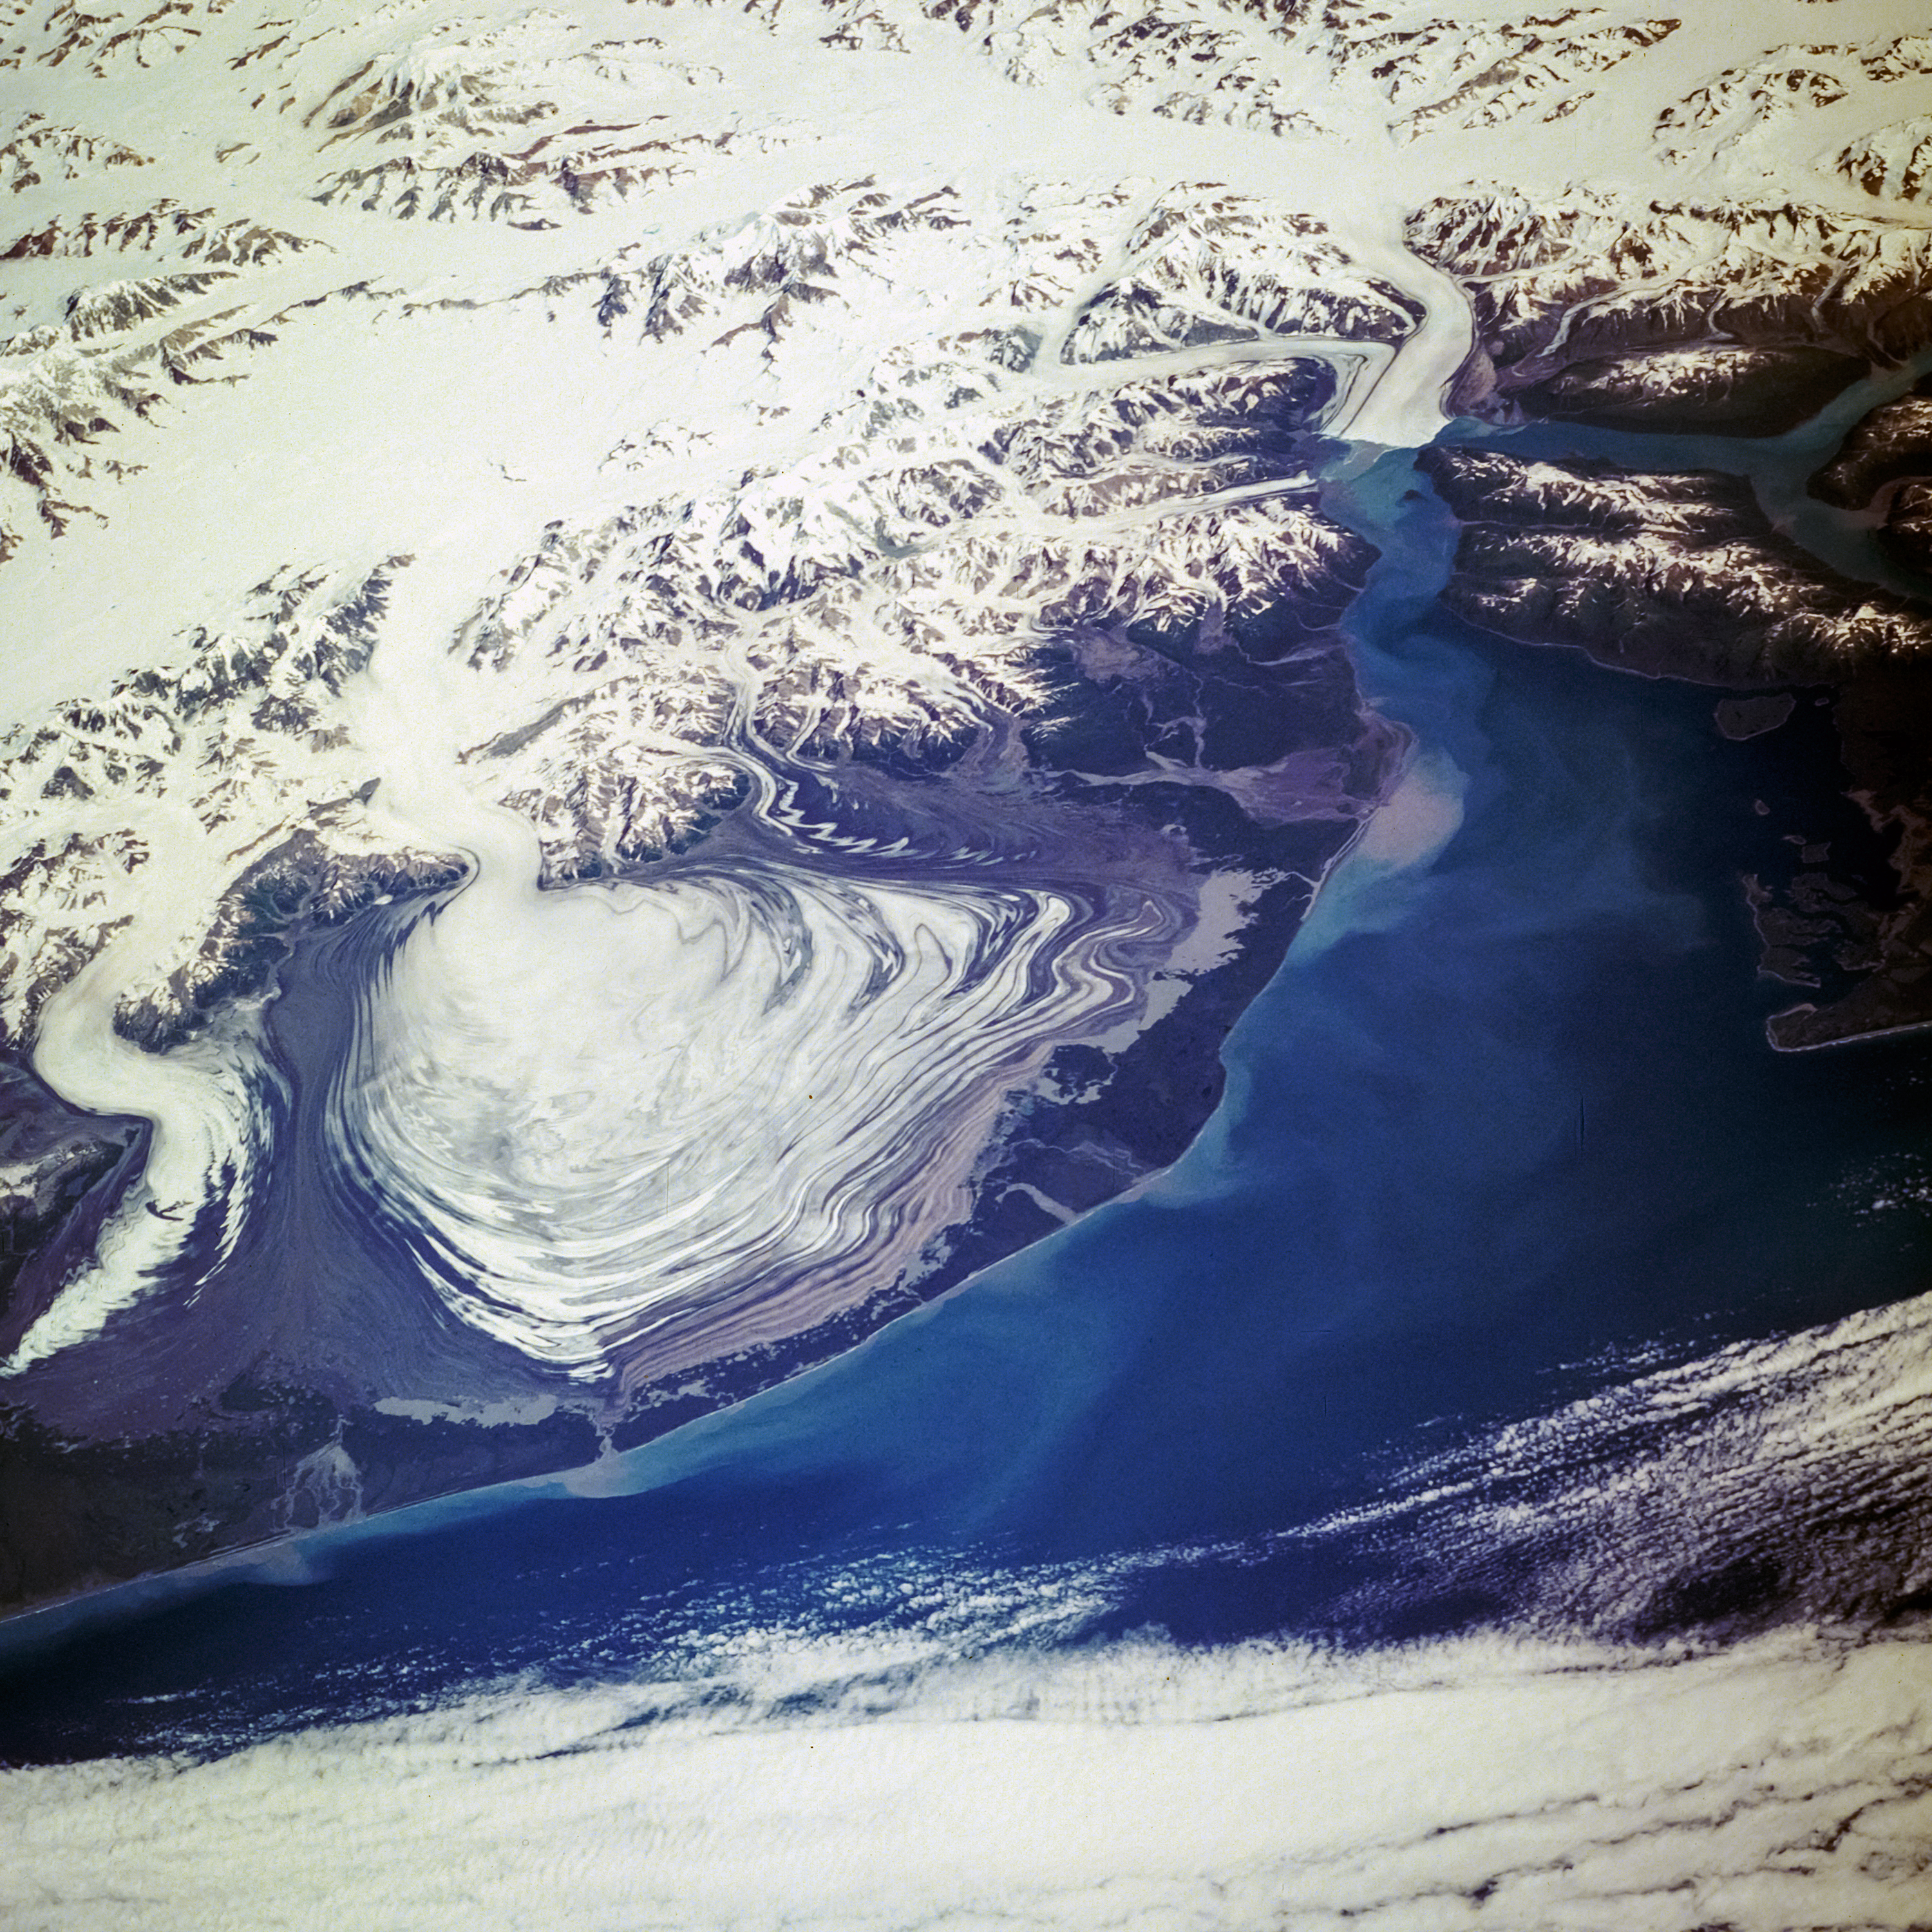 Aerial view of the Hubbard Glacier which is a  glacier located in eastern Alaska and part of Yukon Canada. Elements of this image furnished by NASA. (Roberto Machado Noa&mdash;LightRocket/Getty Images)